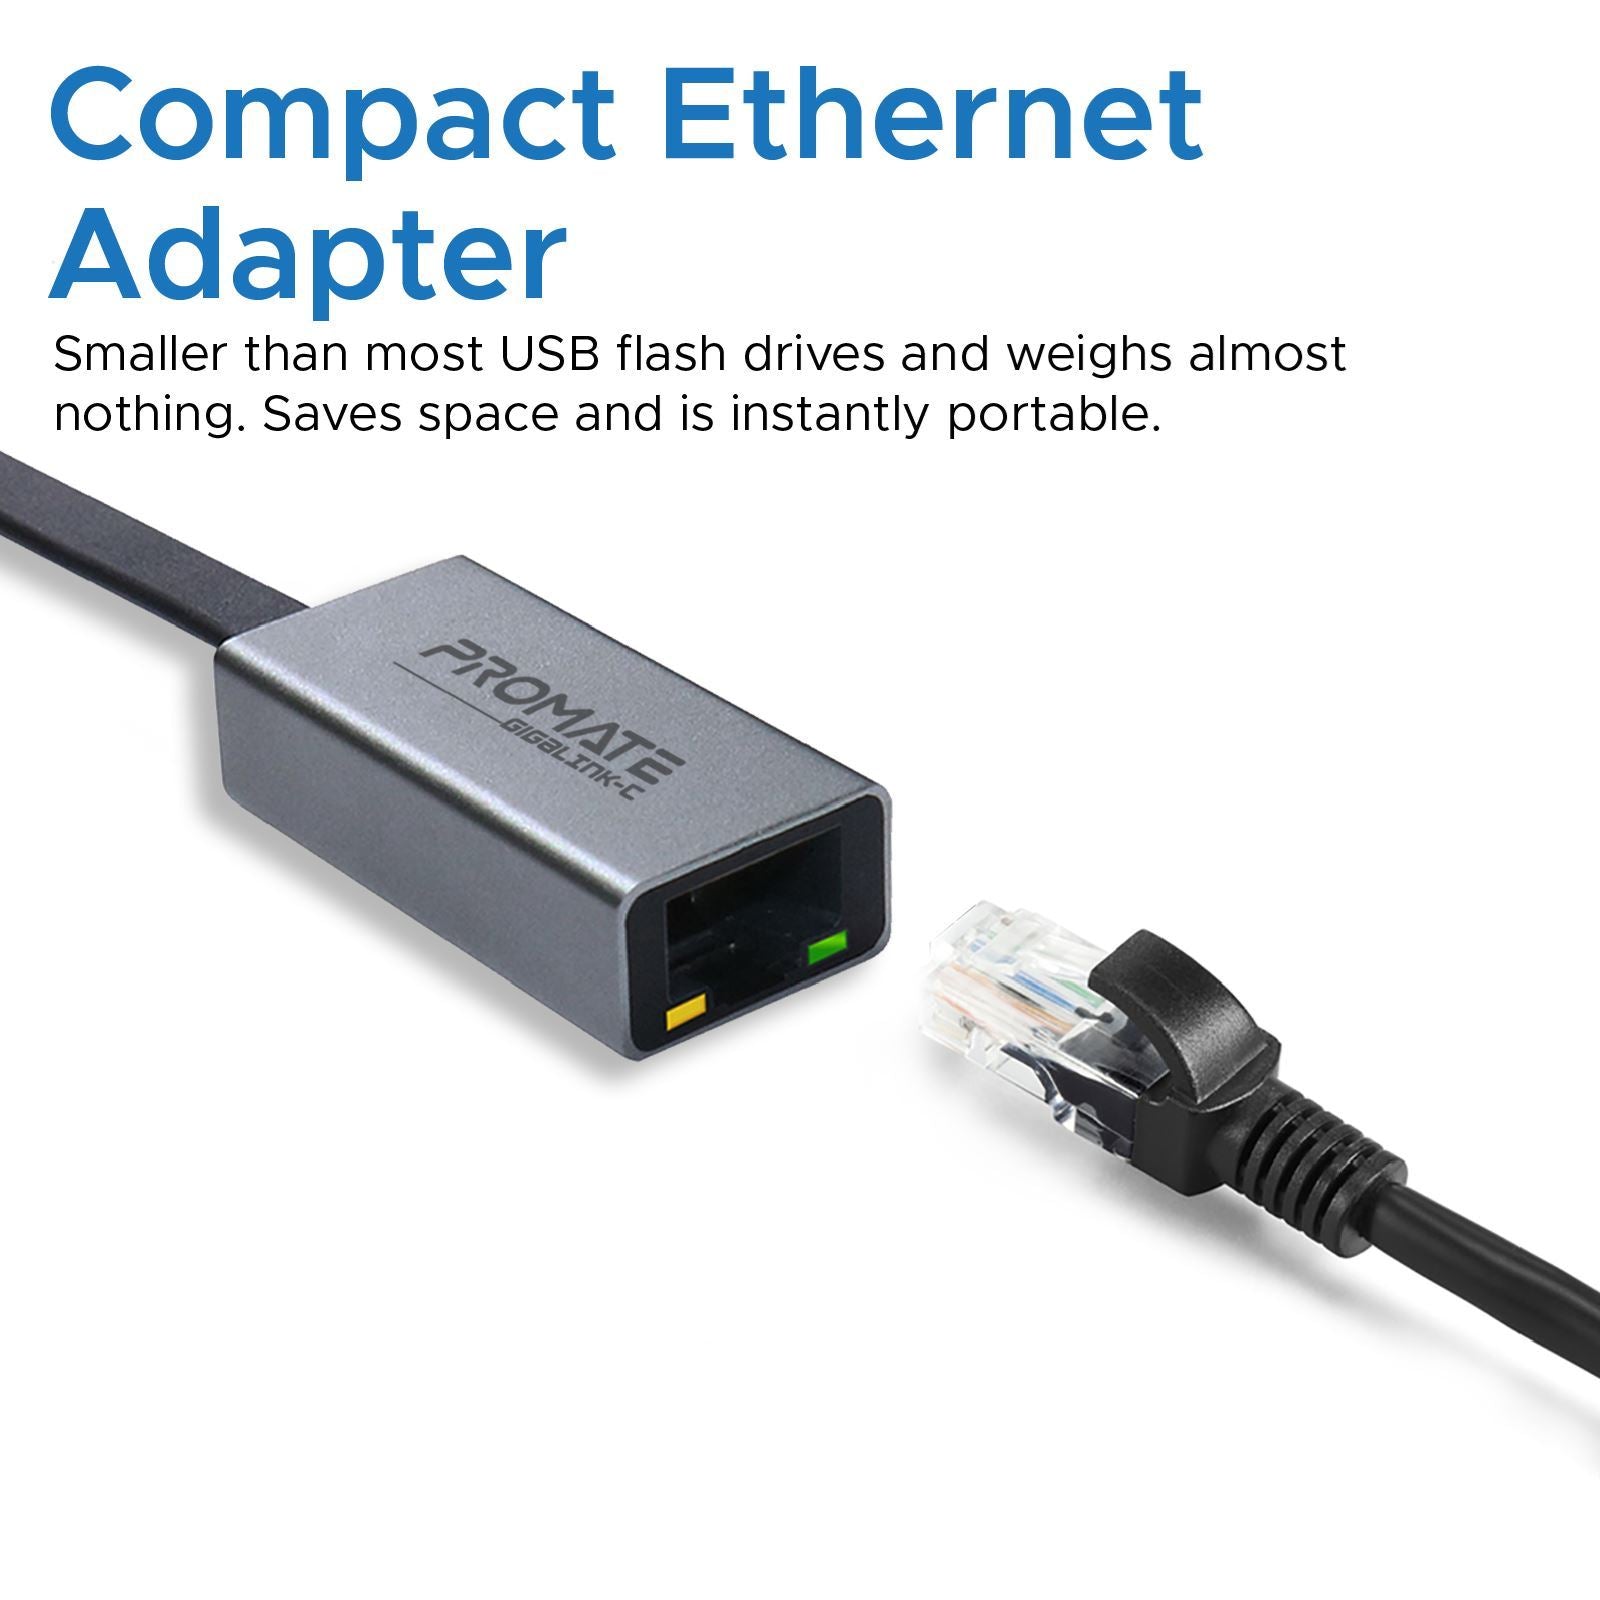 PROMATE_High_Speed_USB-C_to_RJ45_Gigabit_Ethernet_Adapter._Compact_Design,_Premuim_Aluminum_Alloy,_Supports_All_USB-C_Devices_such_as_Laptops,_Tablets,_&_Mobiles._Plug_&_Play._Grey_Colour. 1317